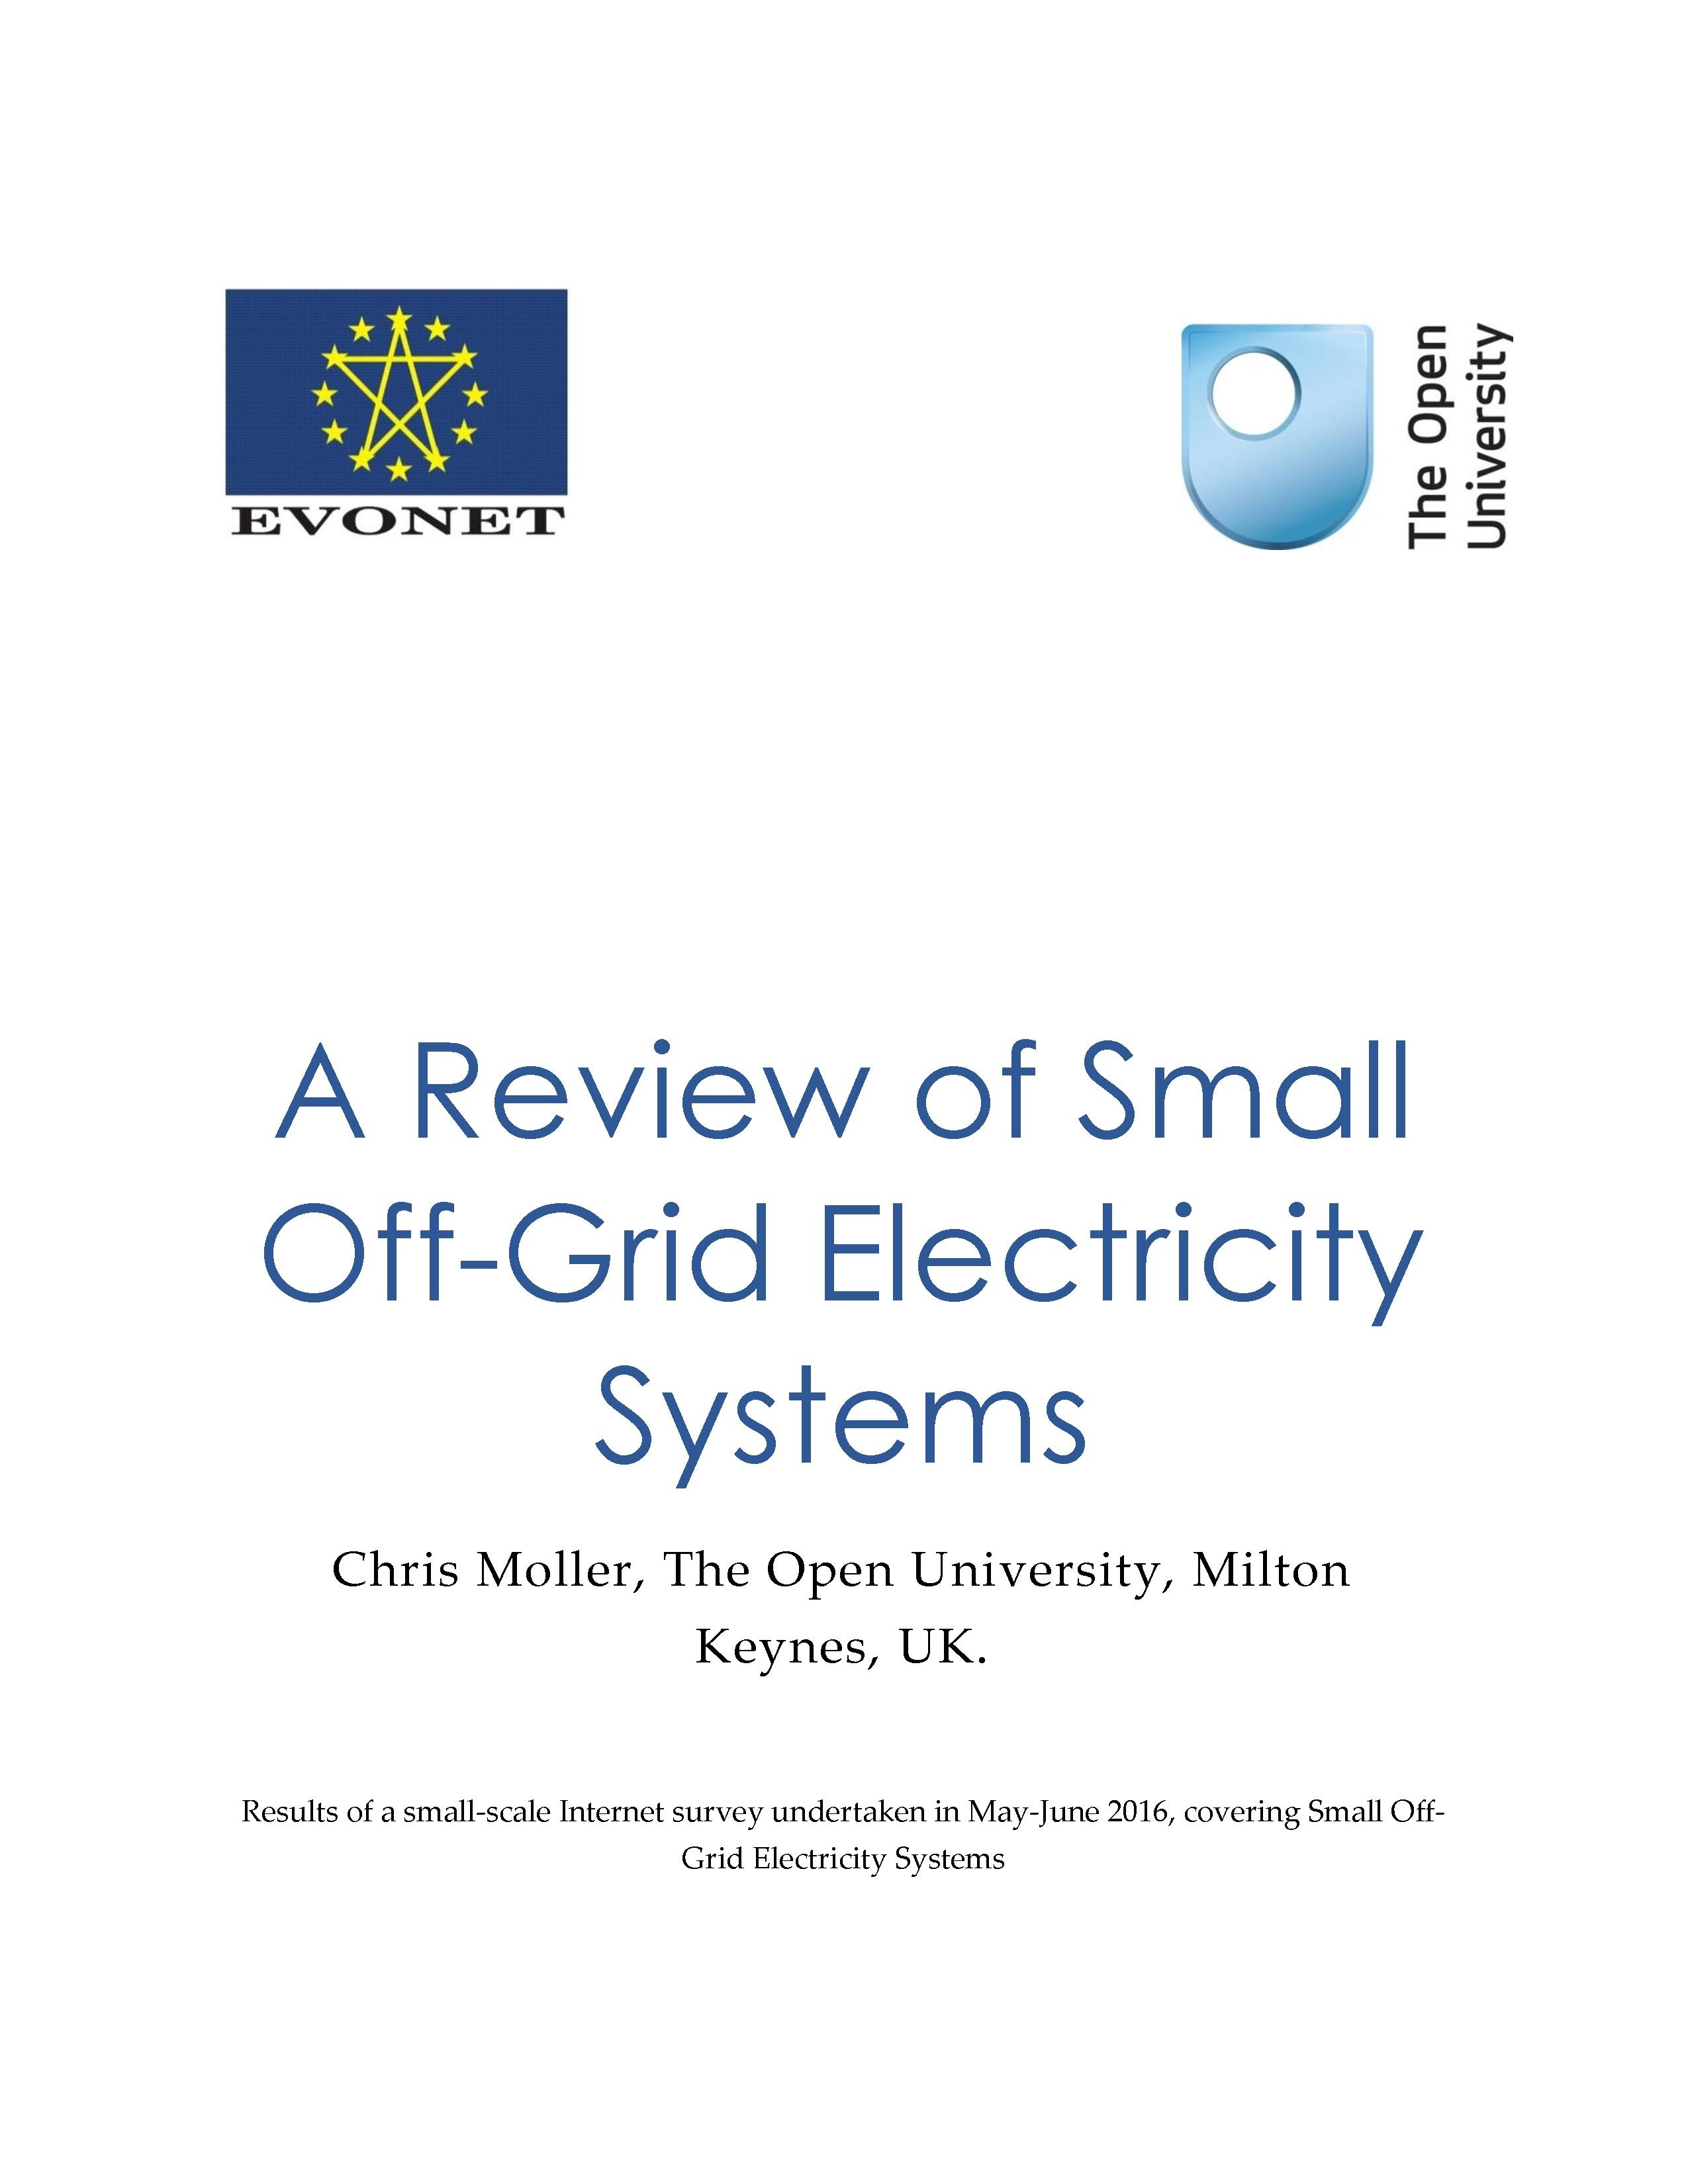 A Review of Small Off-Grid Electricity Systems